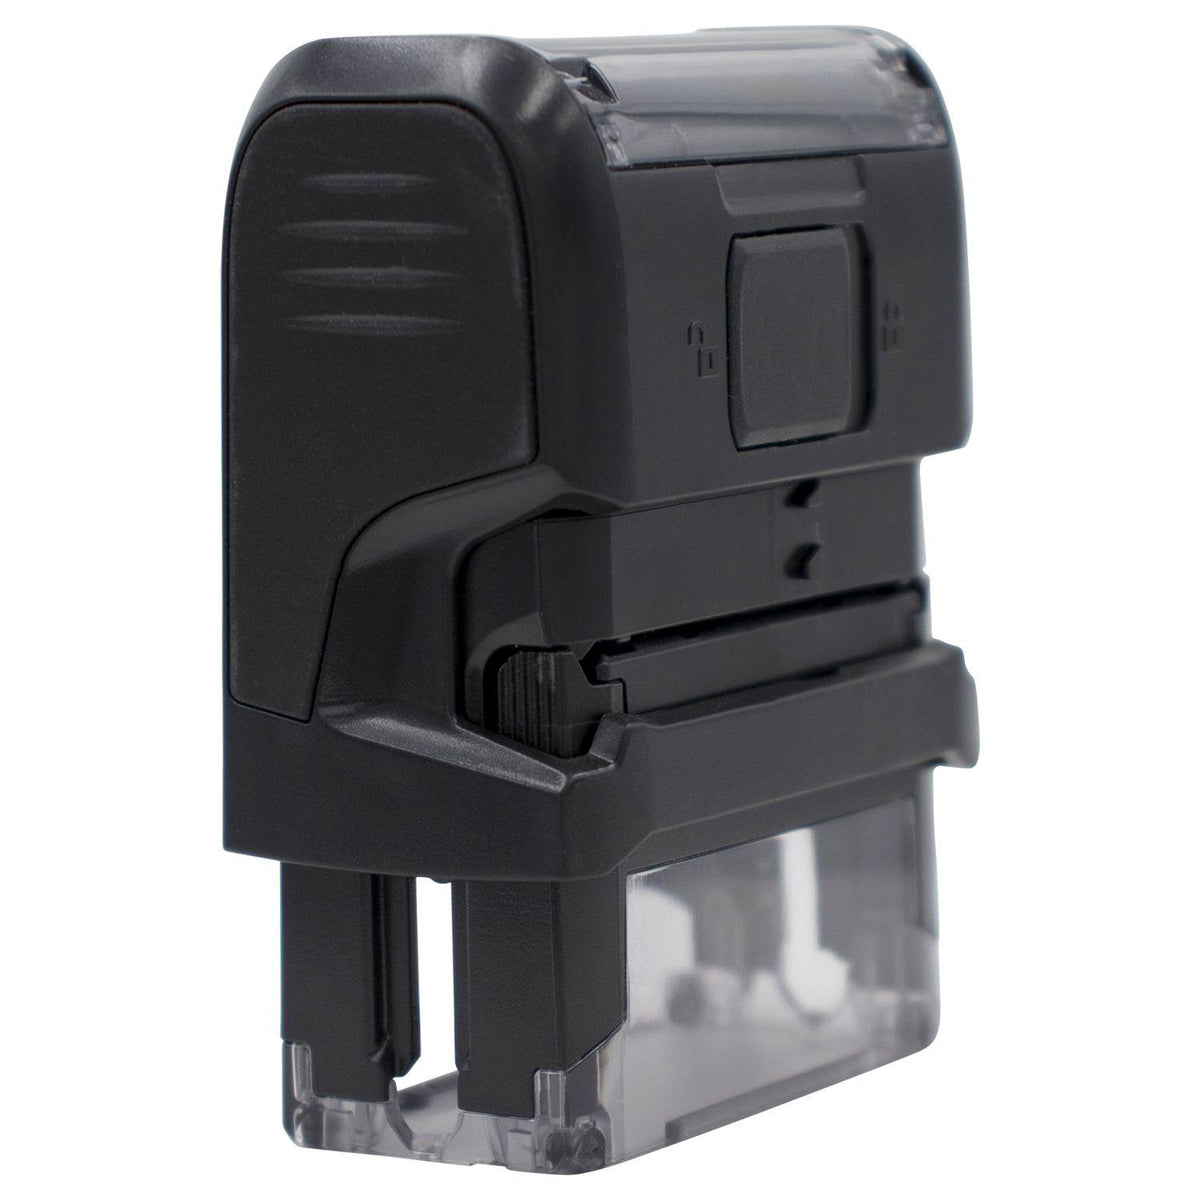 Self-Inking Have a Happy Day Stamp - Engineer Seal Stamps - Brand_Trodat, Impression Size_Small, Stamp Type_Self-Inking Stamp, Type of Use_Office, Type of Use_Teacher